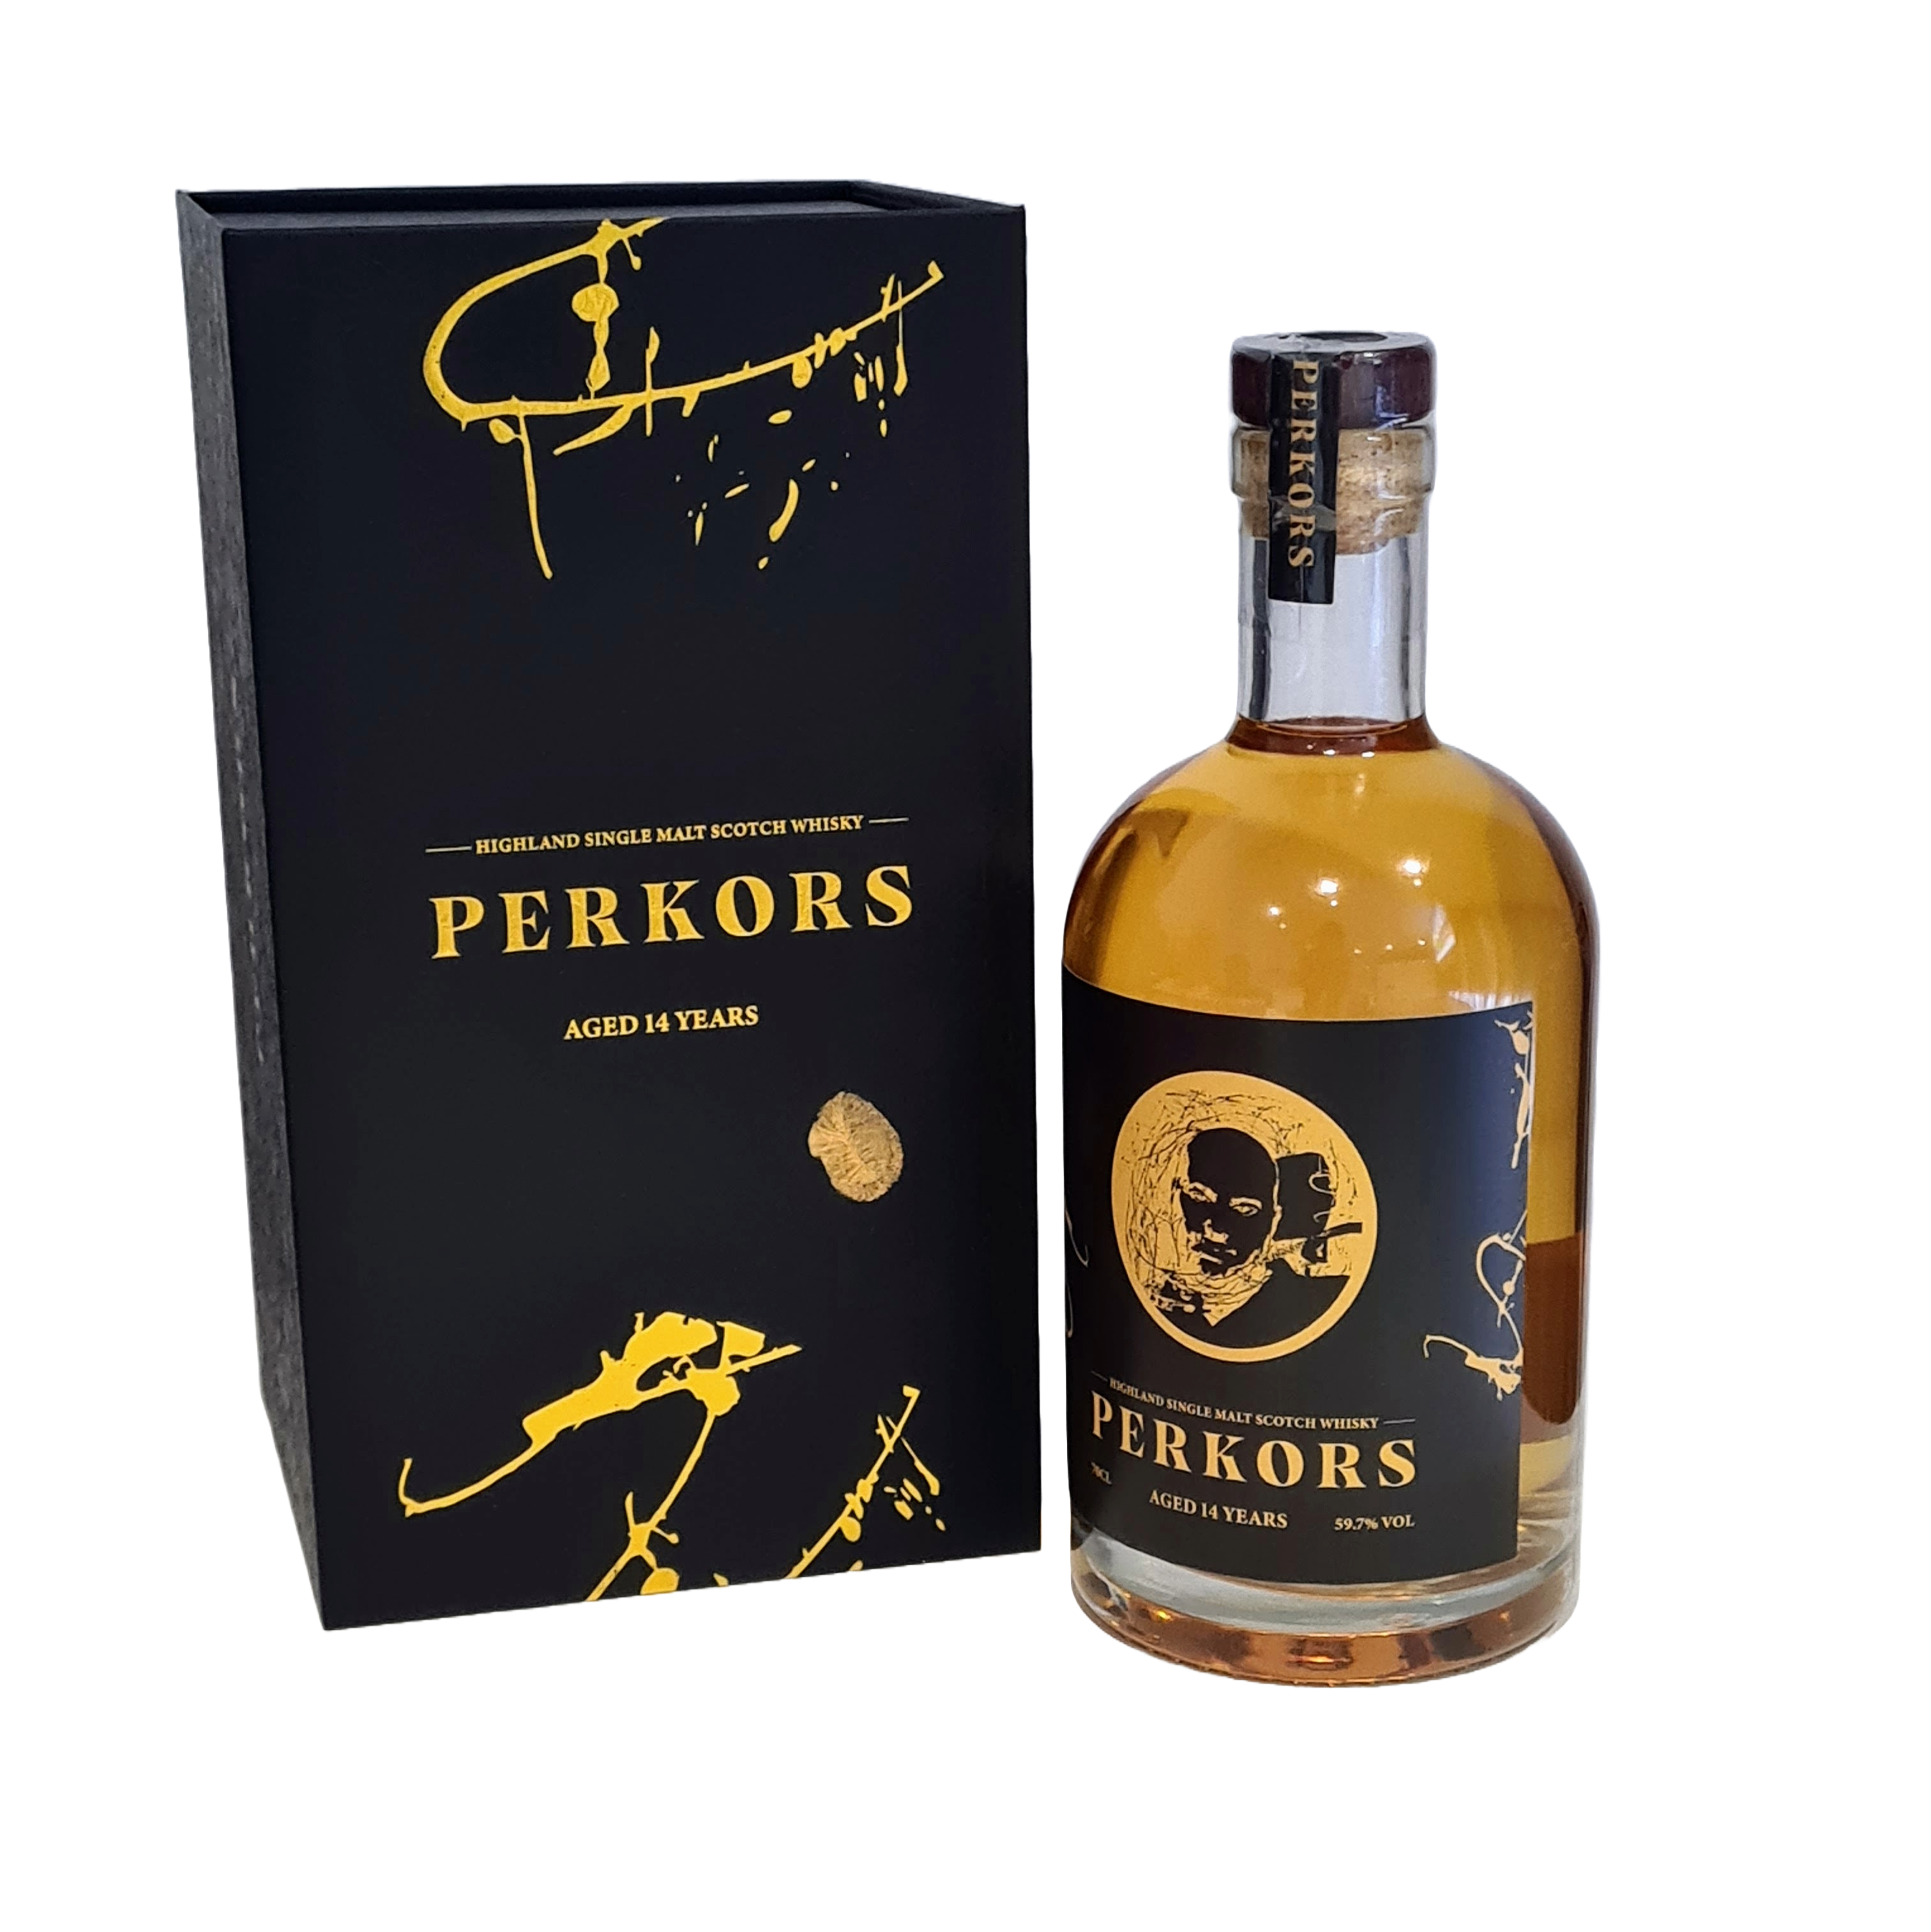 Perkors, Bjorn's own whisky is now available!